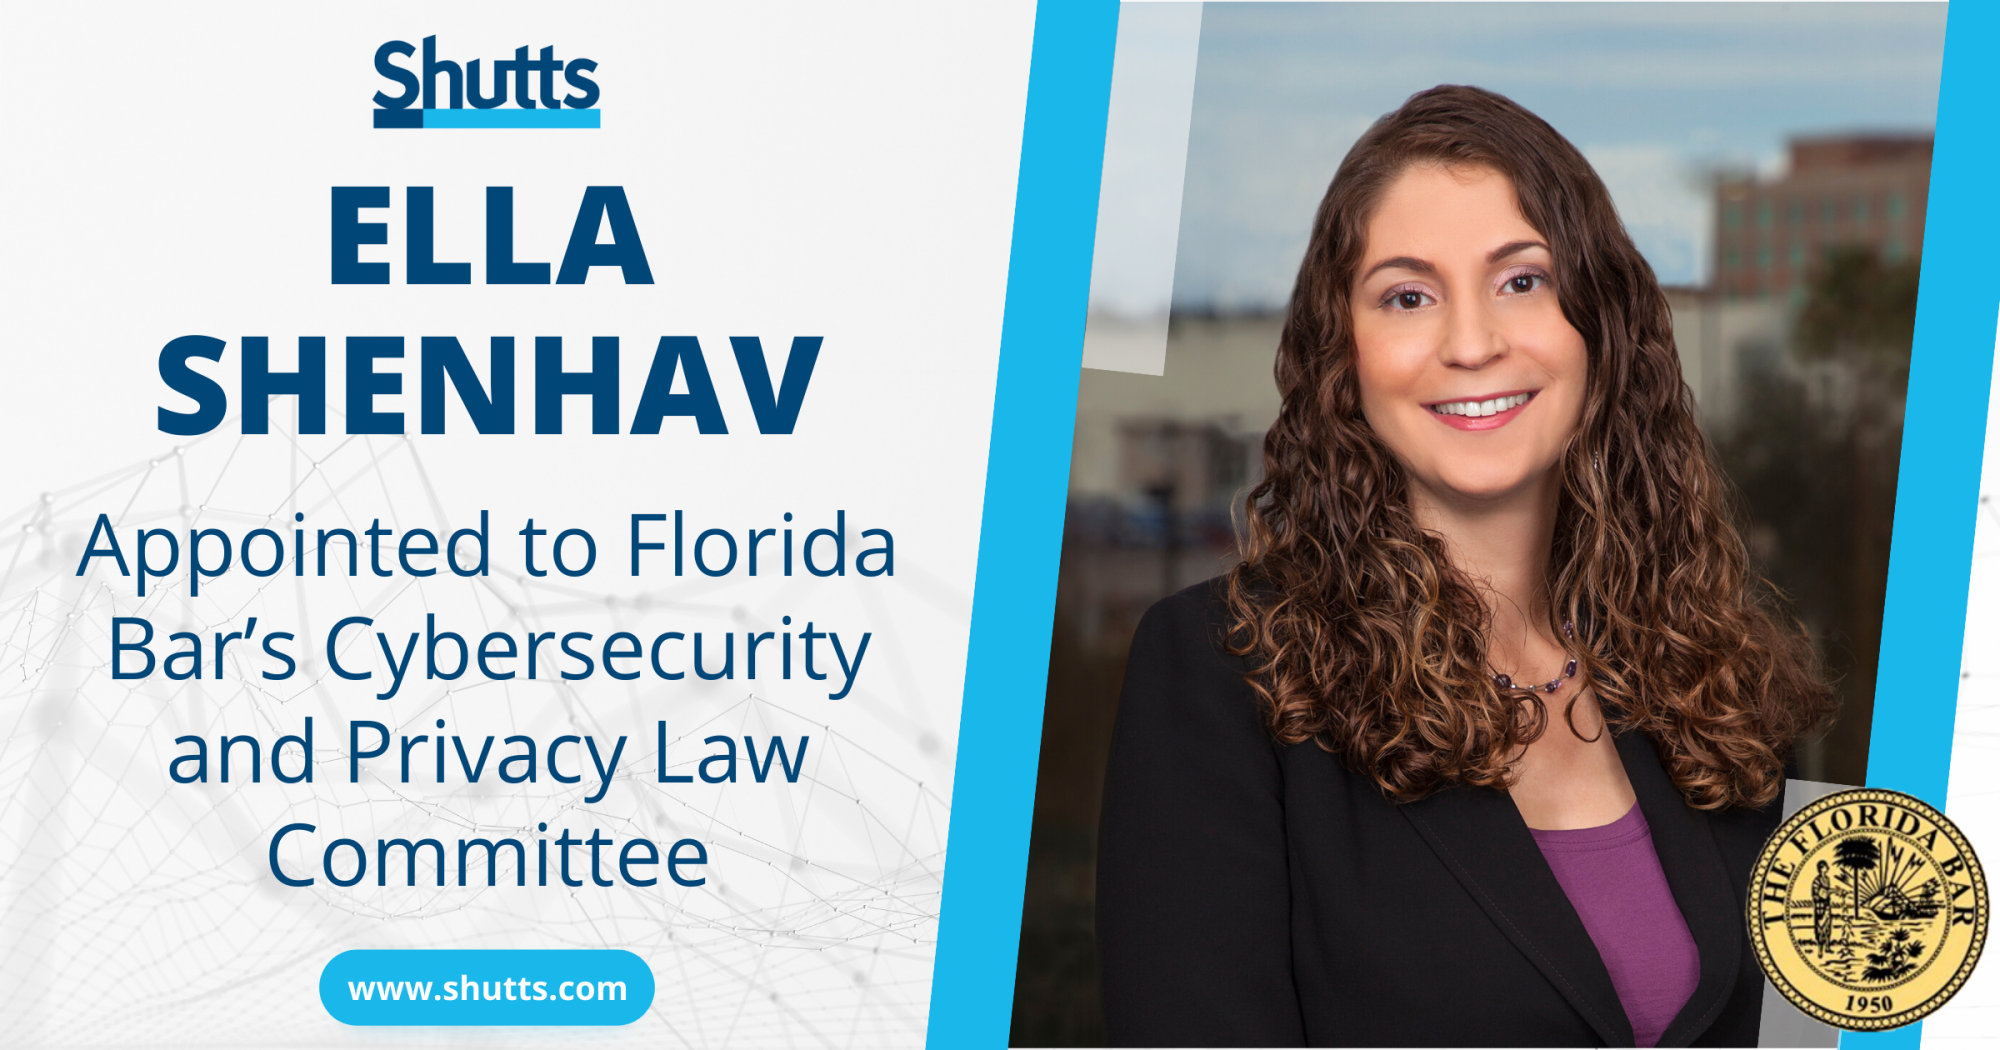 Ella Shenhav Appointed to Florida Bar’s Cybersecurity and Privacy Law Committee